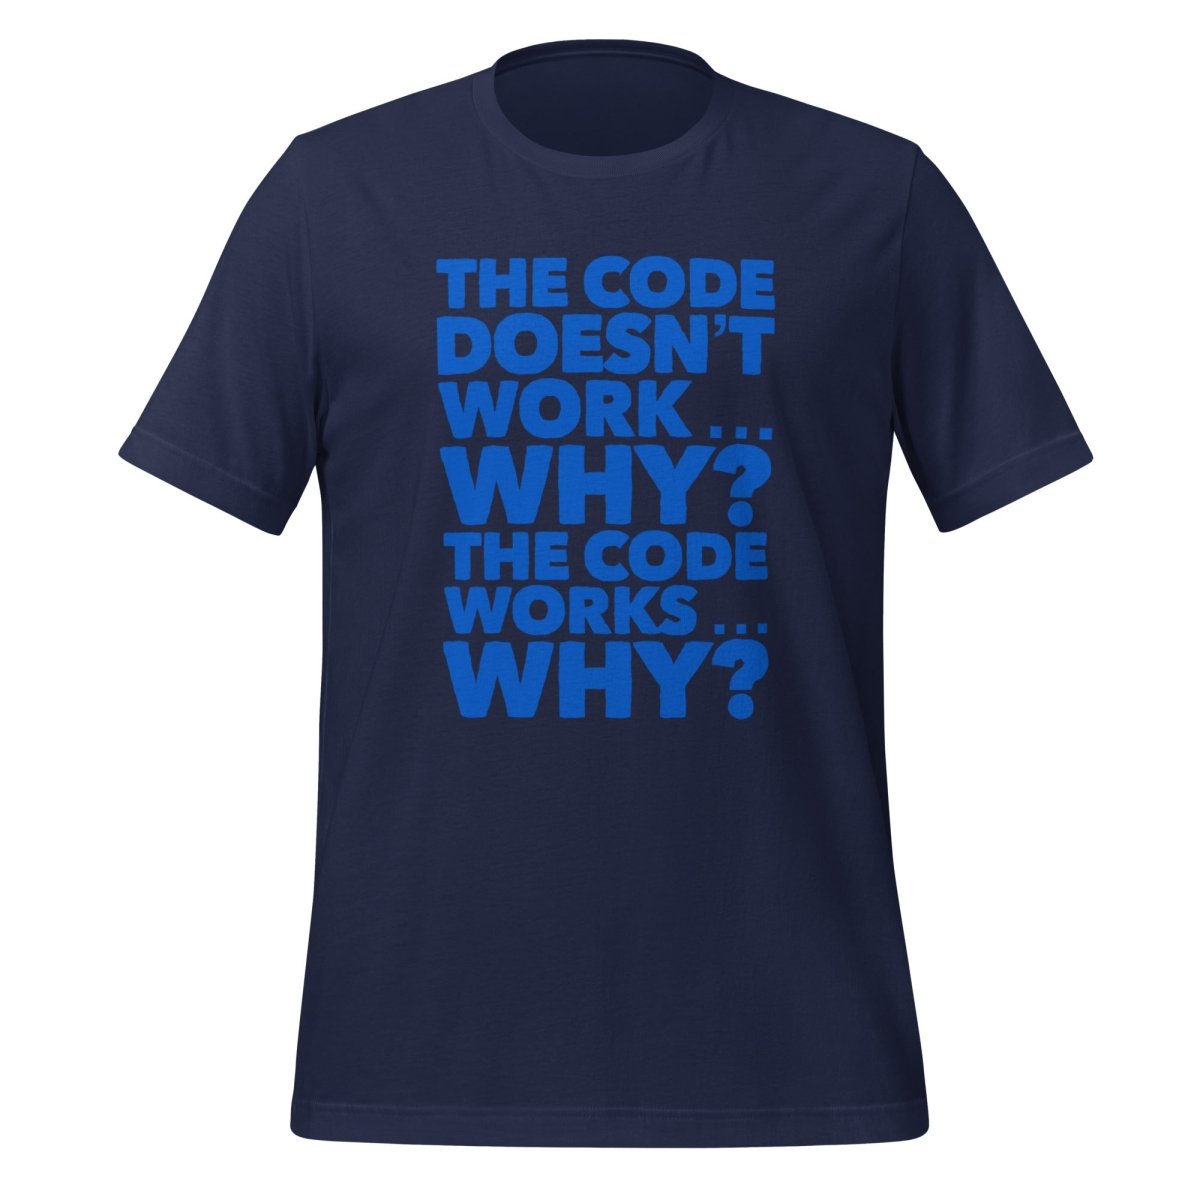 The code doesn't work, why? T - Shirt 2 (unisex) - Navy - AI Store